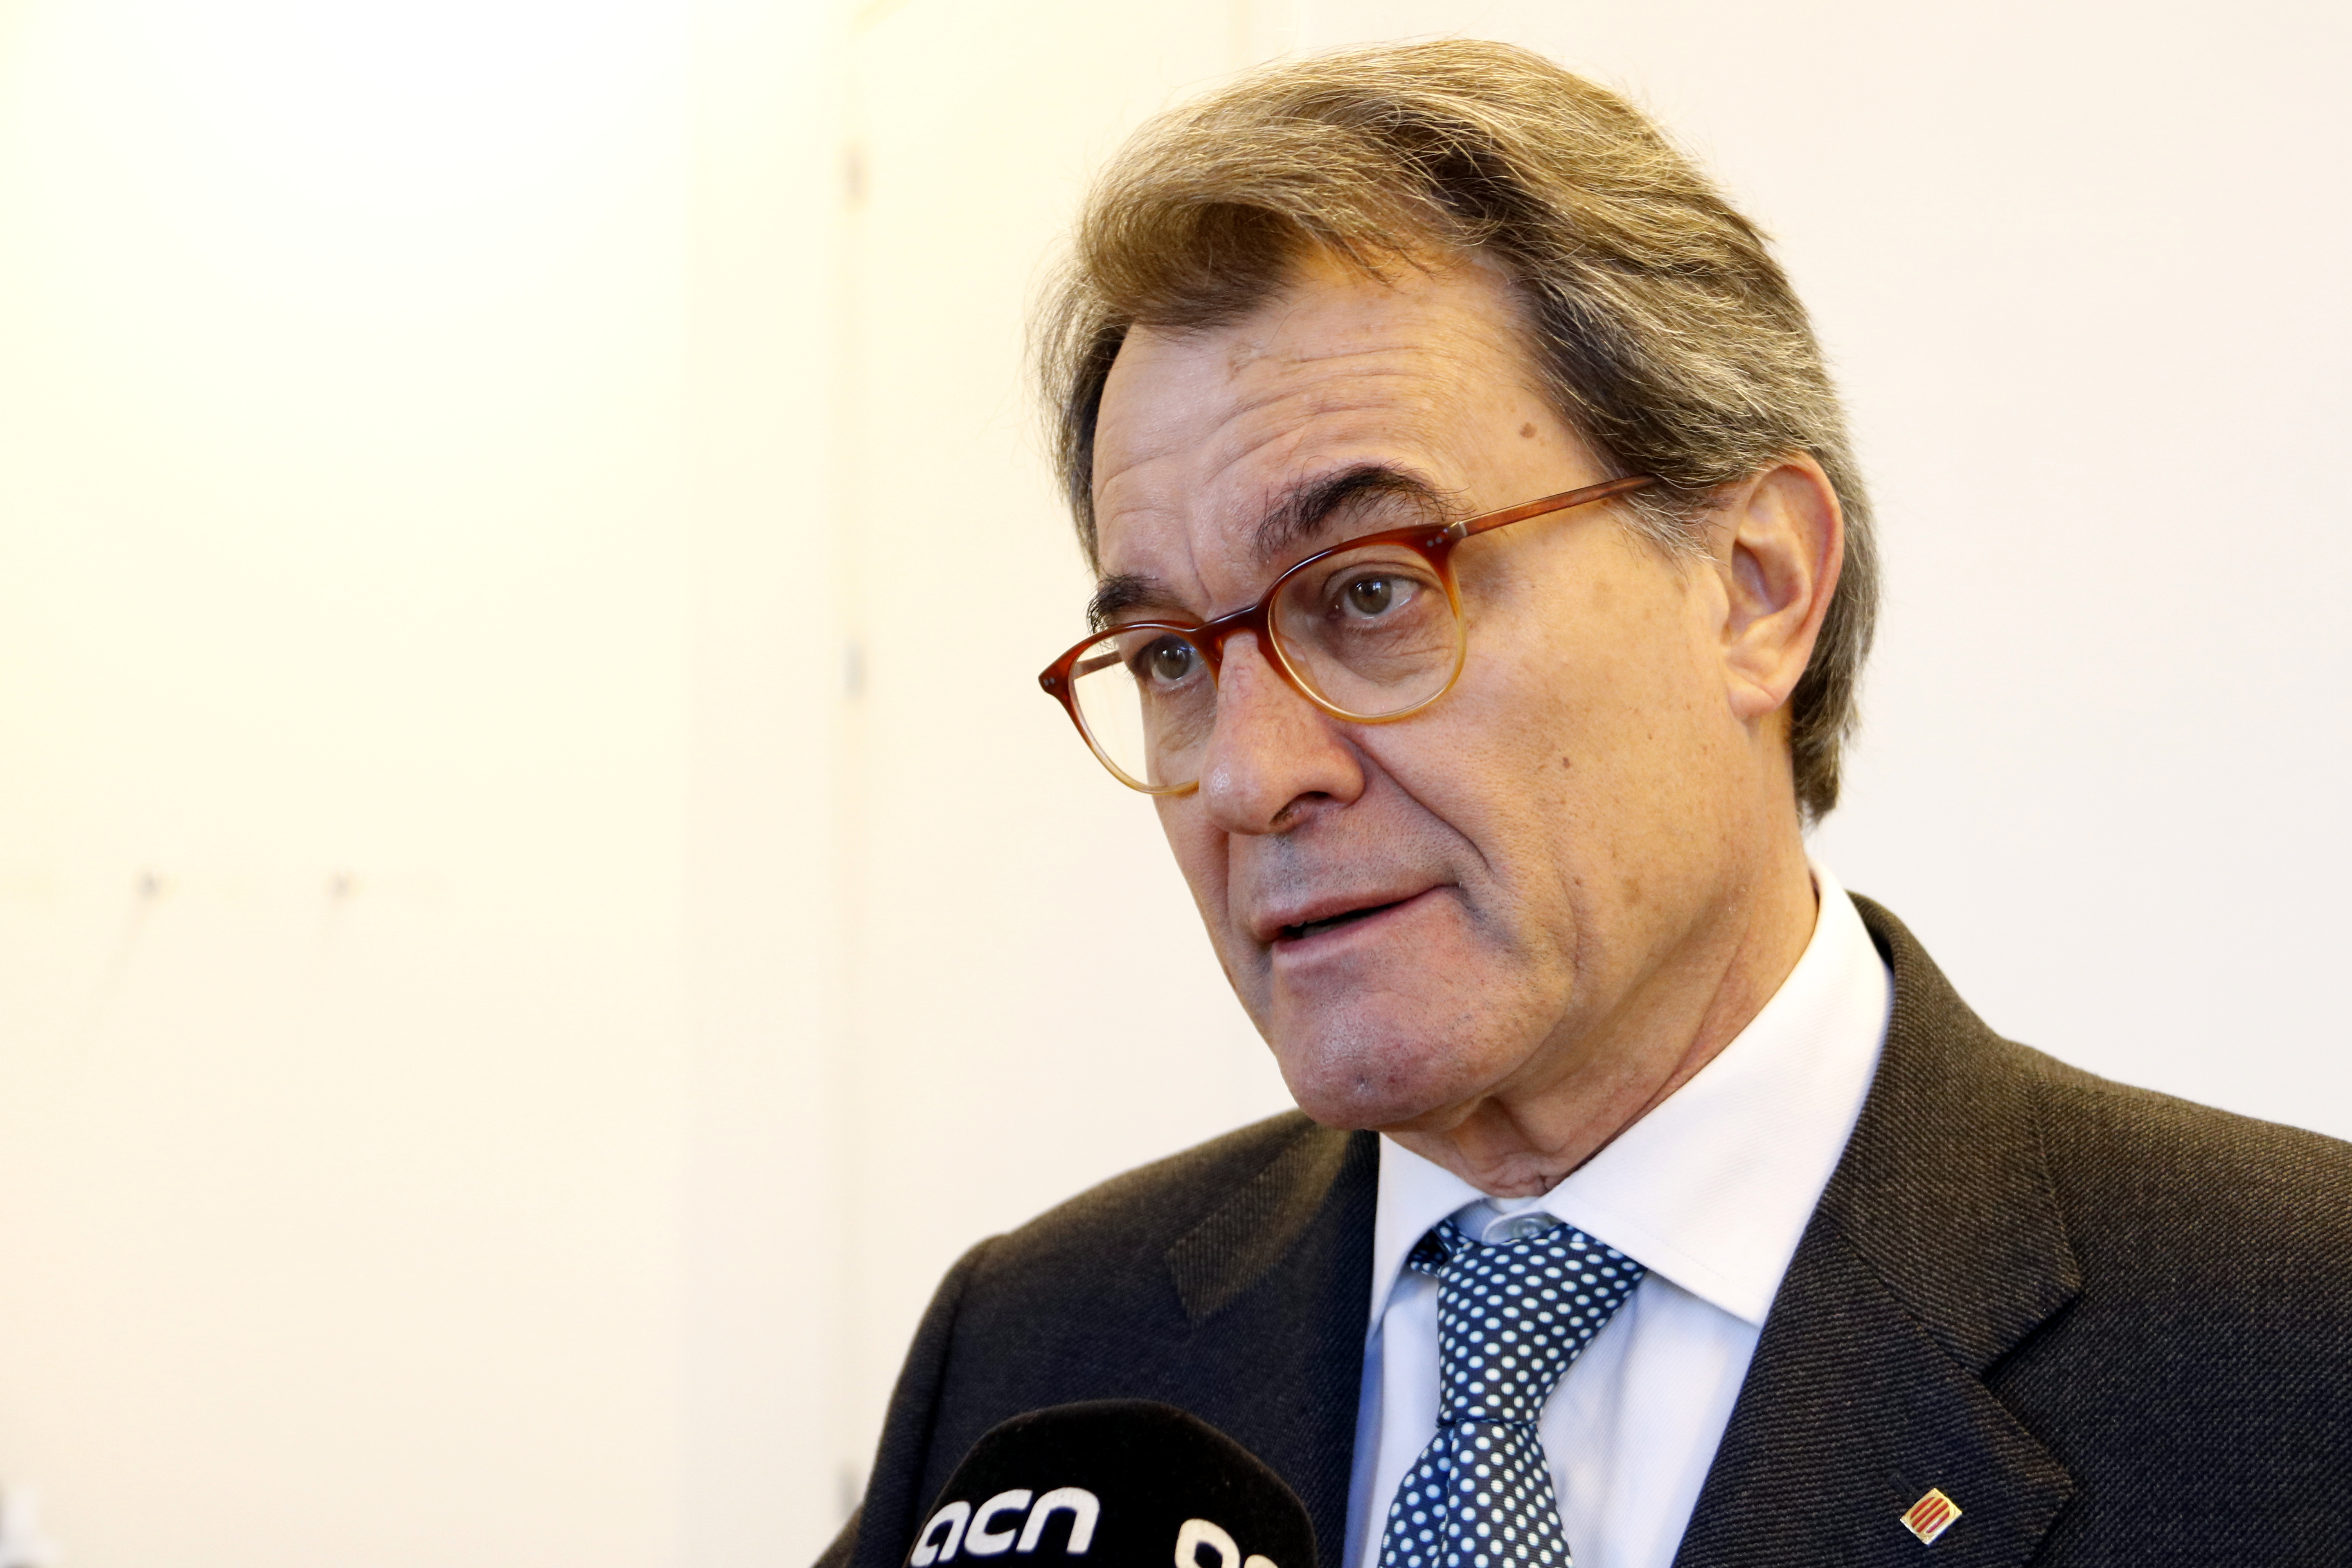 Former Convergència leader Artur Mas reacts to the 'Palau' Case sentencing in statements to the Catalan News Agency (ACN) on January 15 2018 (by Josep Ramon Torné)